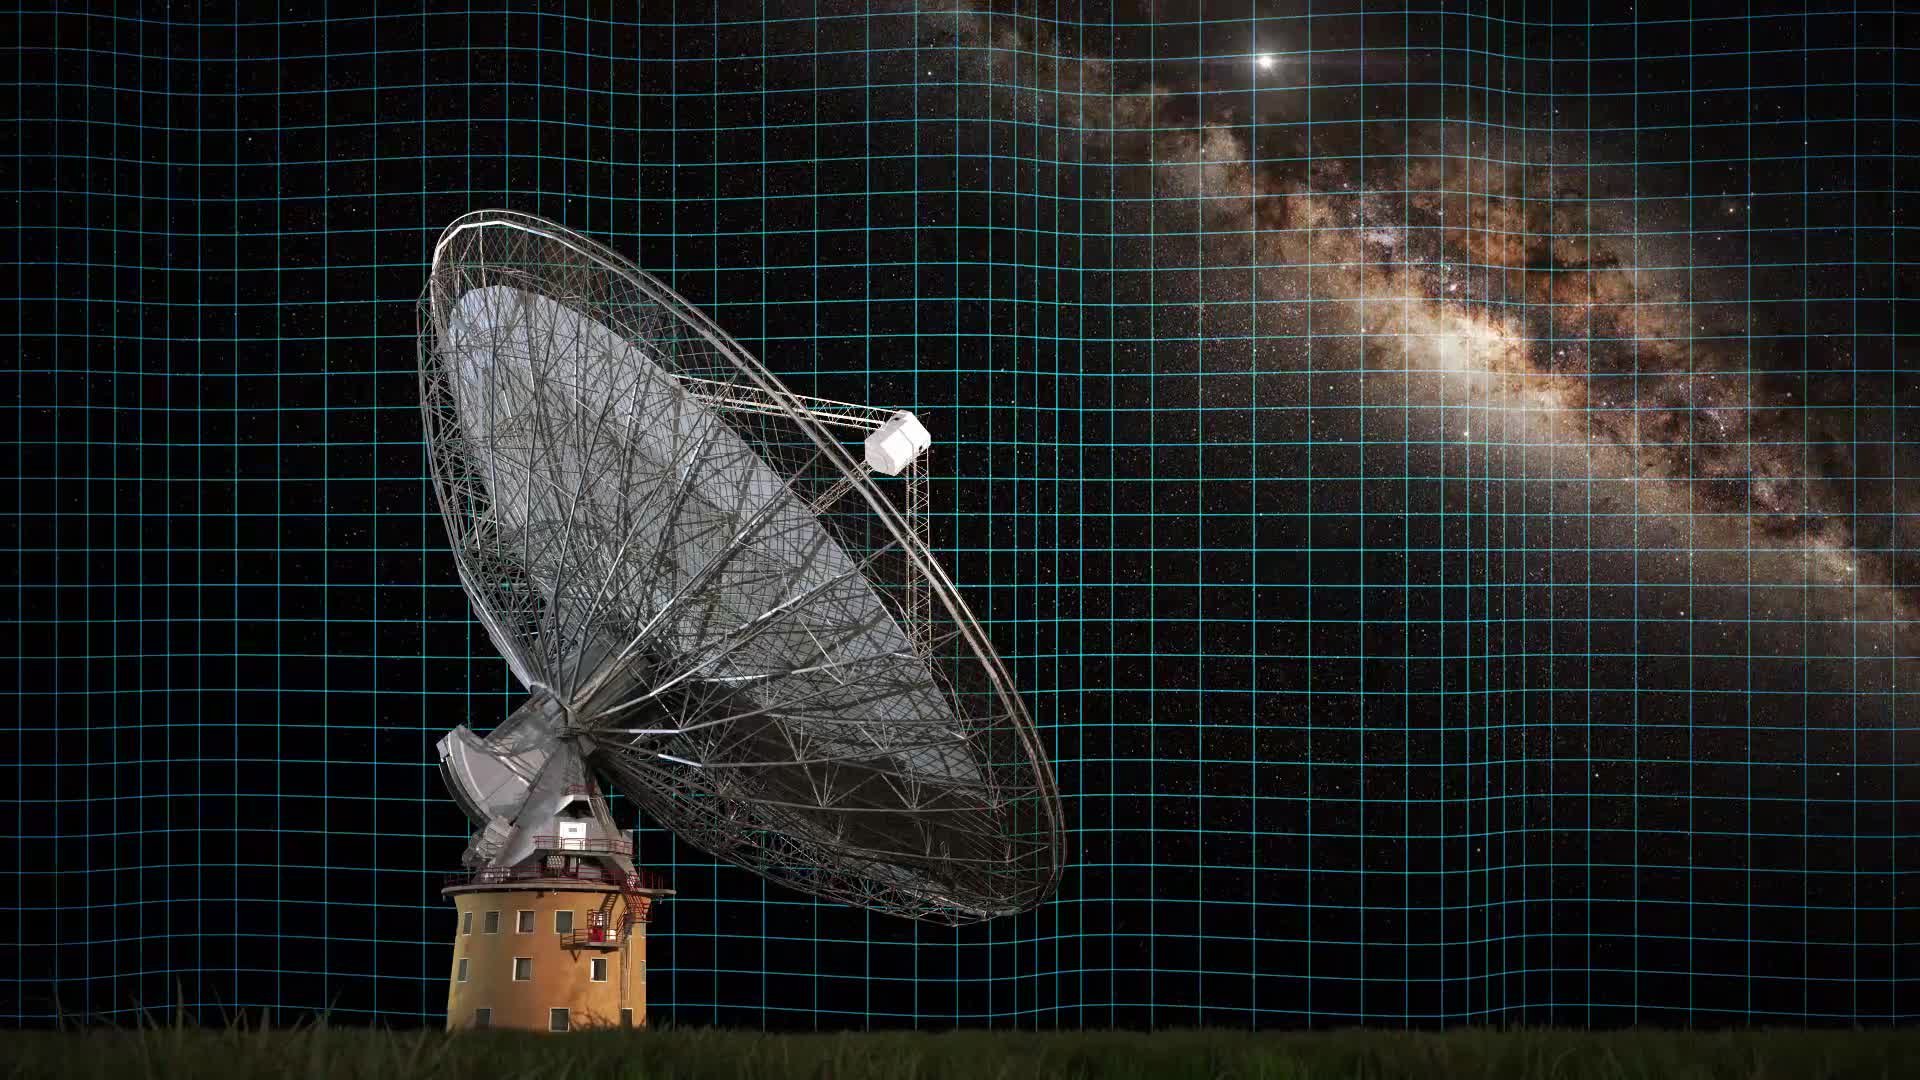 Gravitational waves distort space, altering the regular signals from pulsars received by the CSIRO Parkes Radio Telescope. Credit: Swinburne Astronomy Productions.